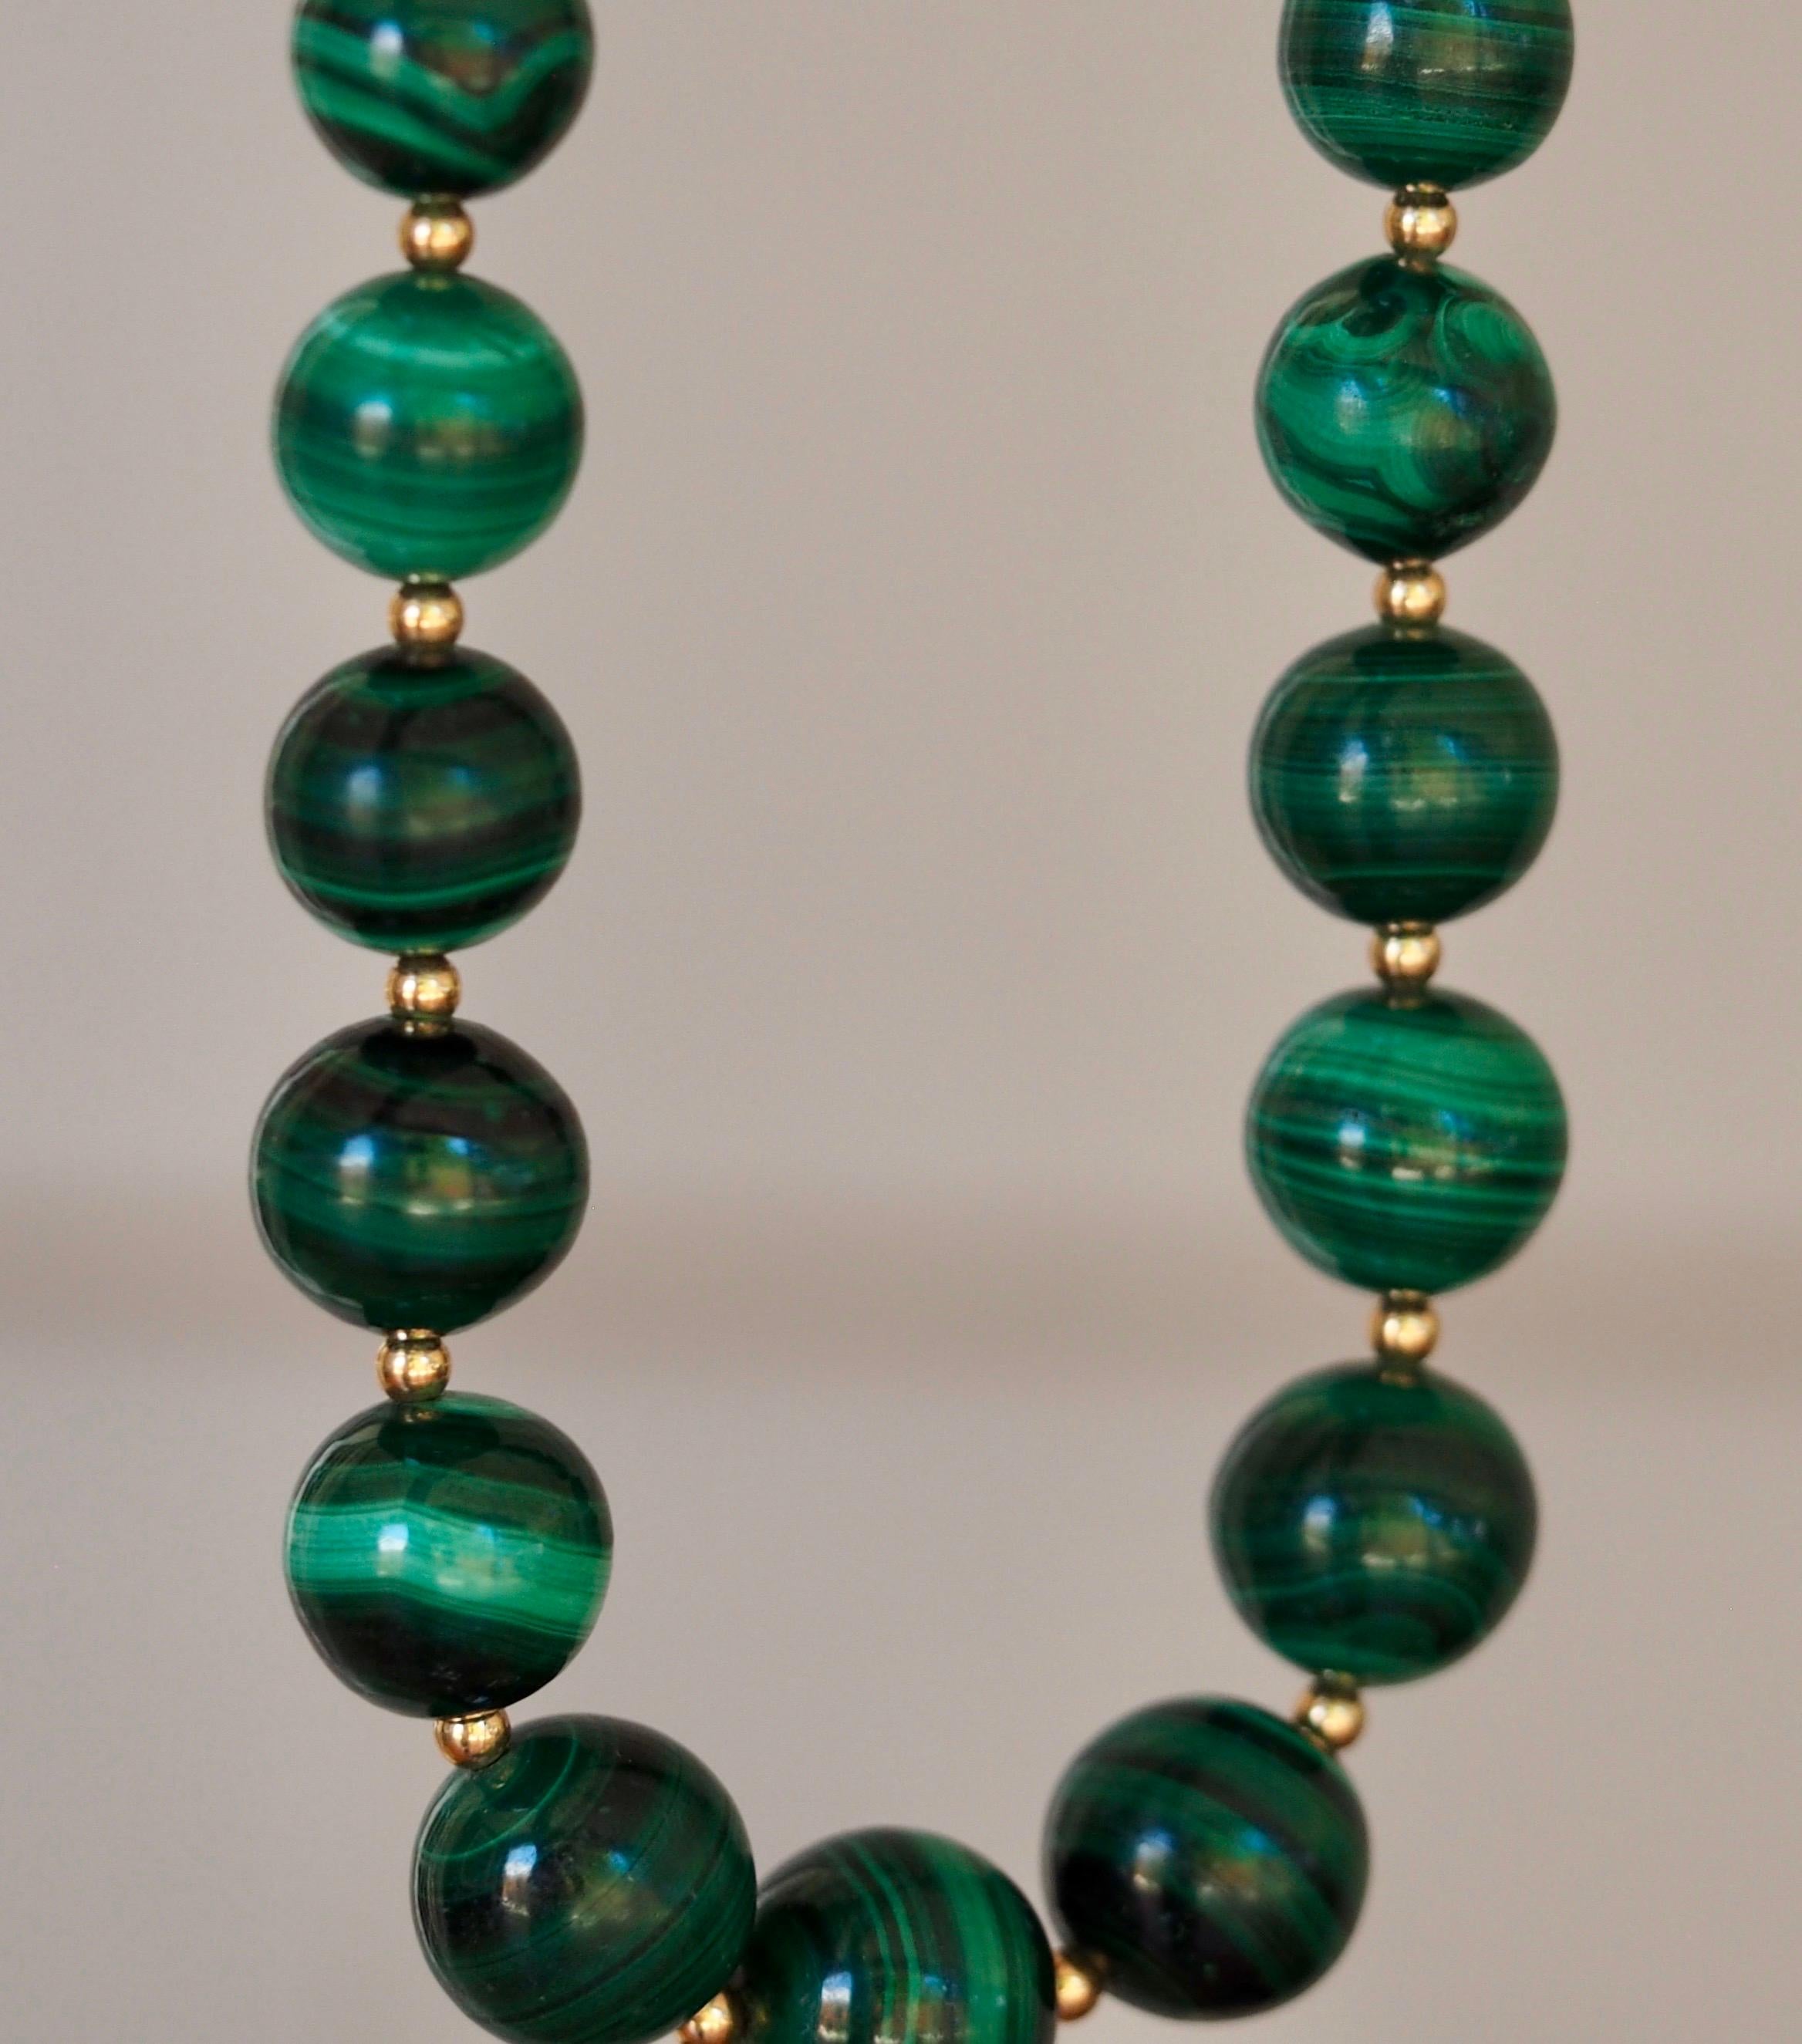 Graduated Malachite Bead Necklace is absolutely mesmerizing.  This necklace is made of 49 beads graduating from 6.41 mm - 14.42 mm alternating with gold filled beads for a perfect accent and is finished with a spring ring clasp.  The strand is 25